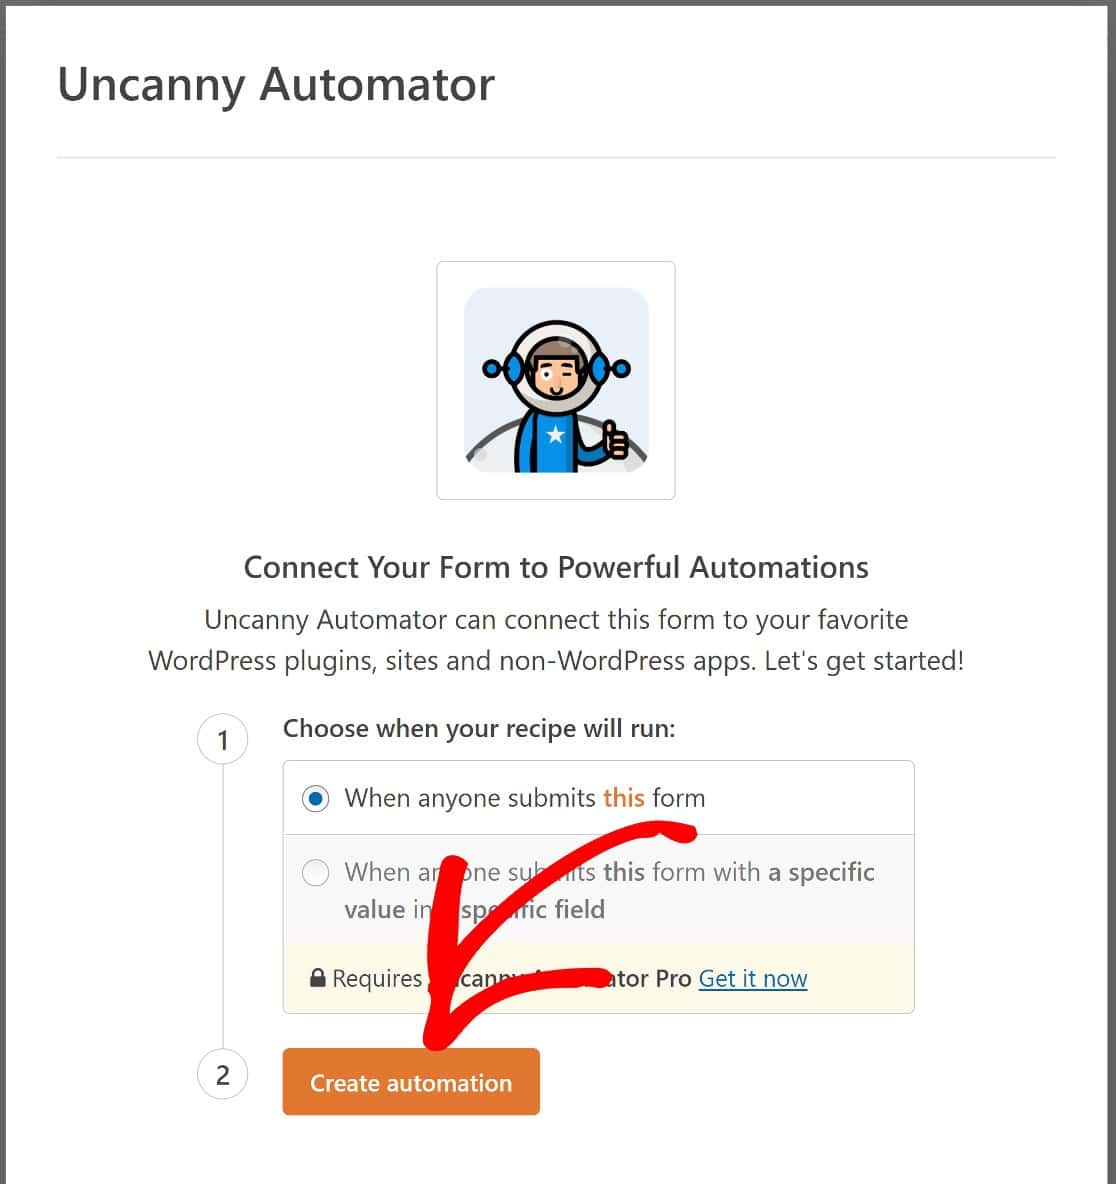 Click the create automation button